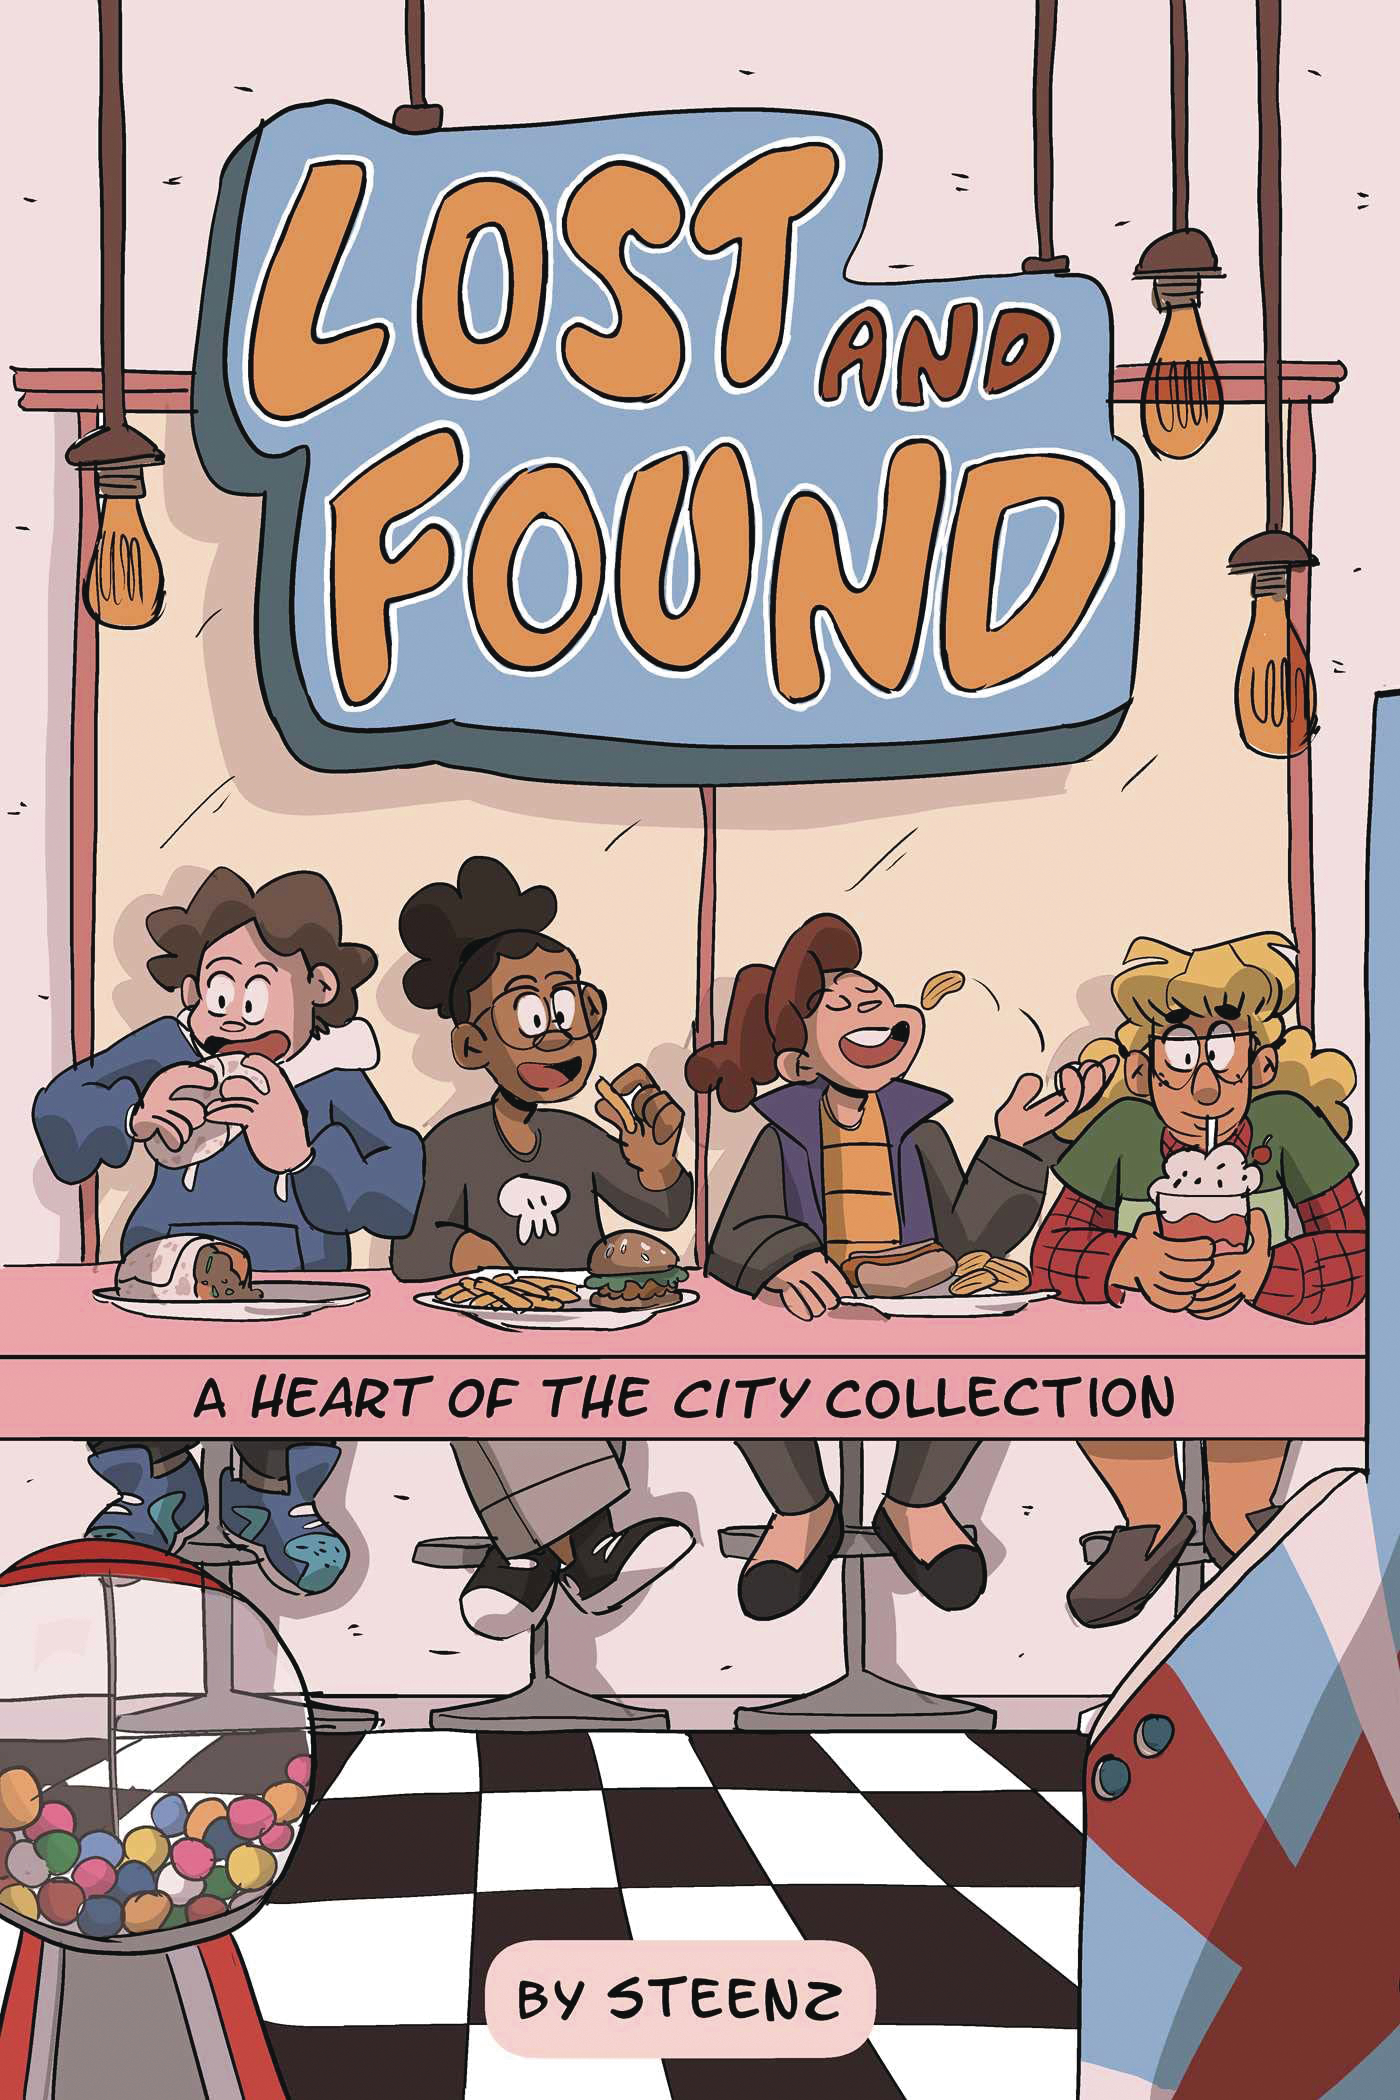 Heart of the City Collection #2 Lost & Found